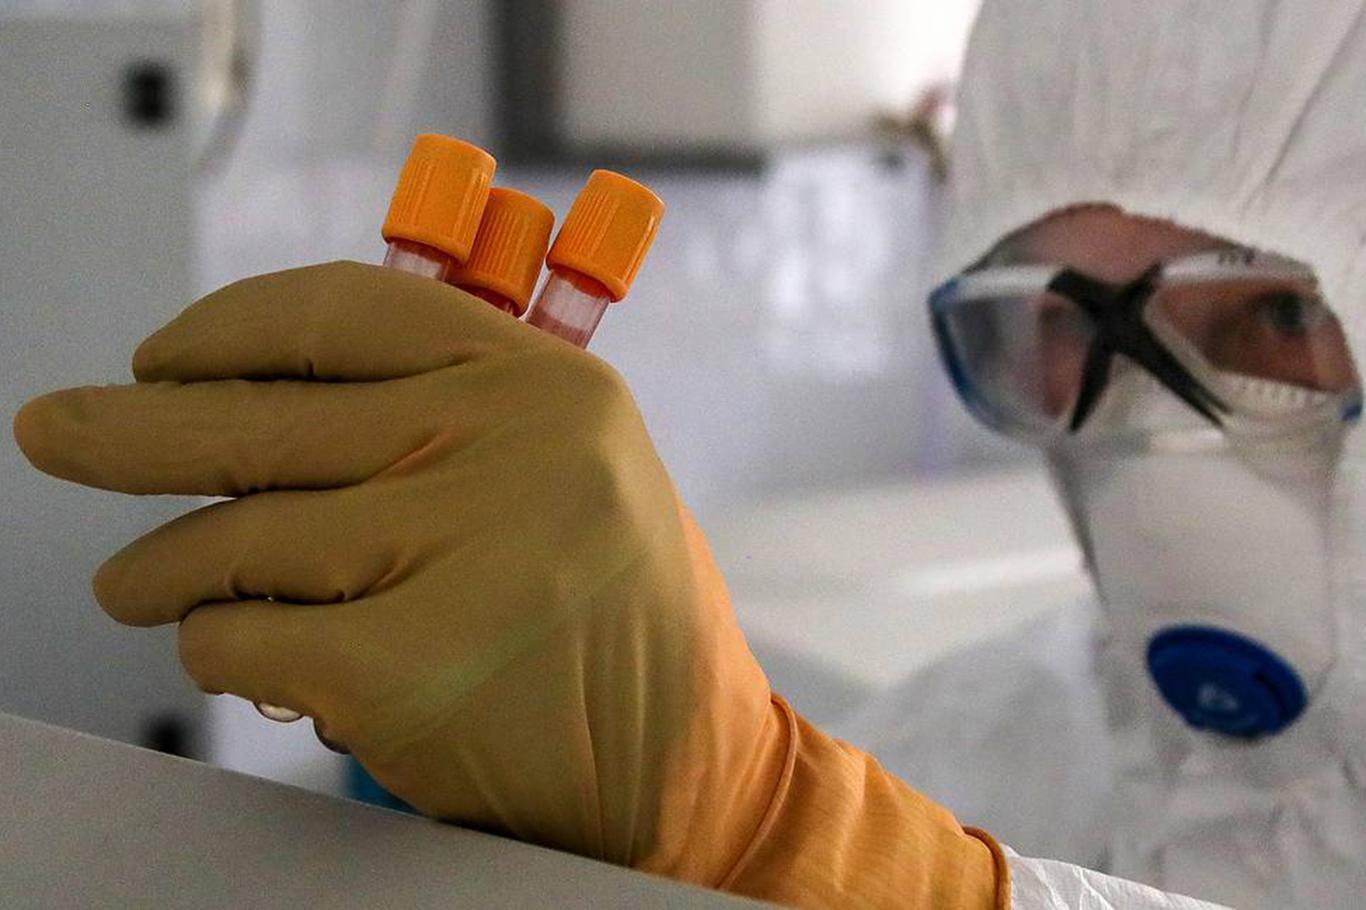 Brazil reports 1086 deaths from coronavirus in the past 24 hours